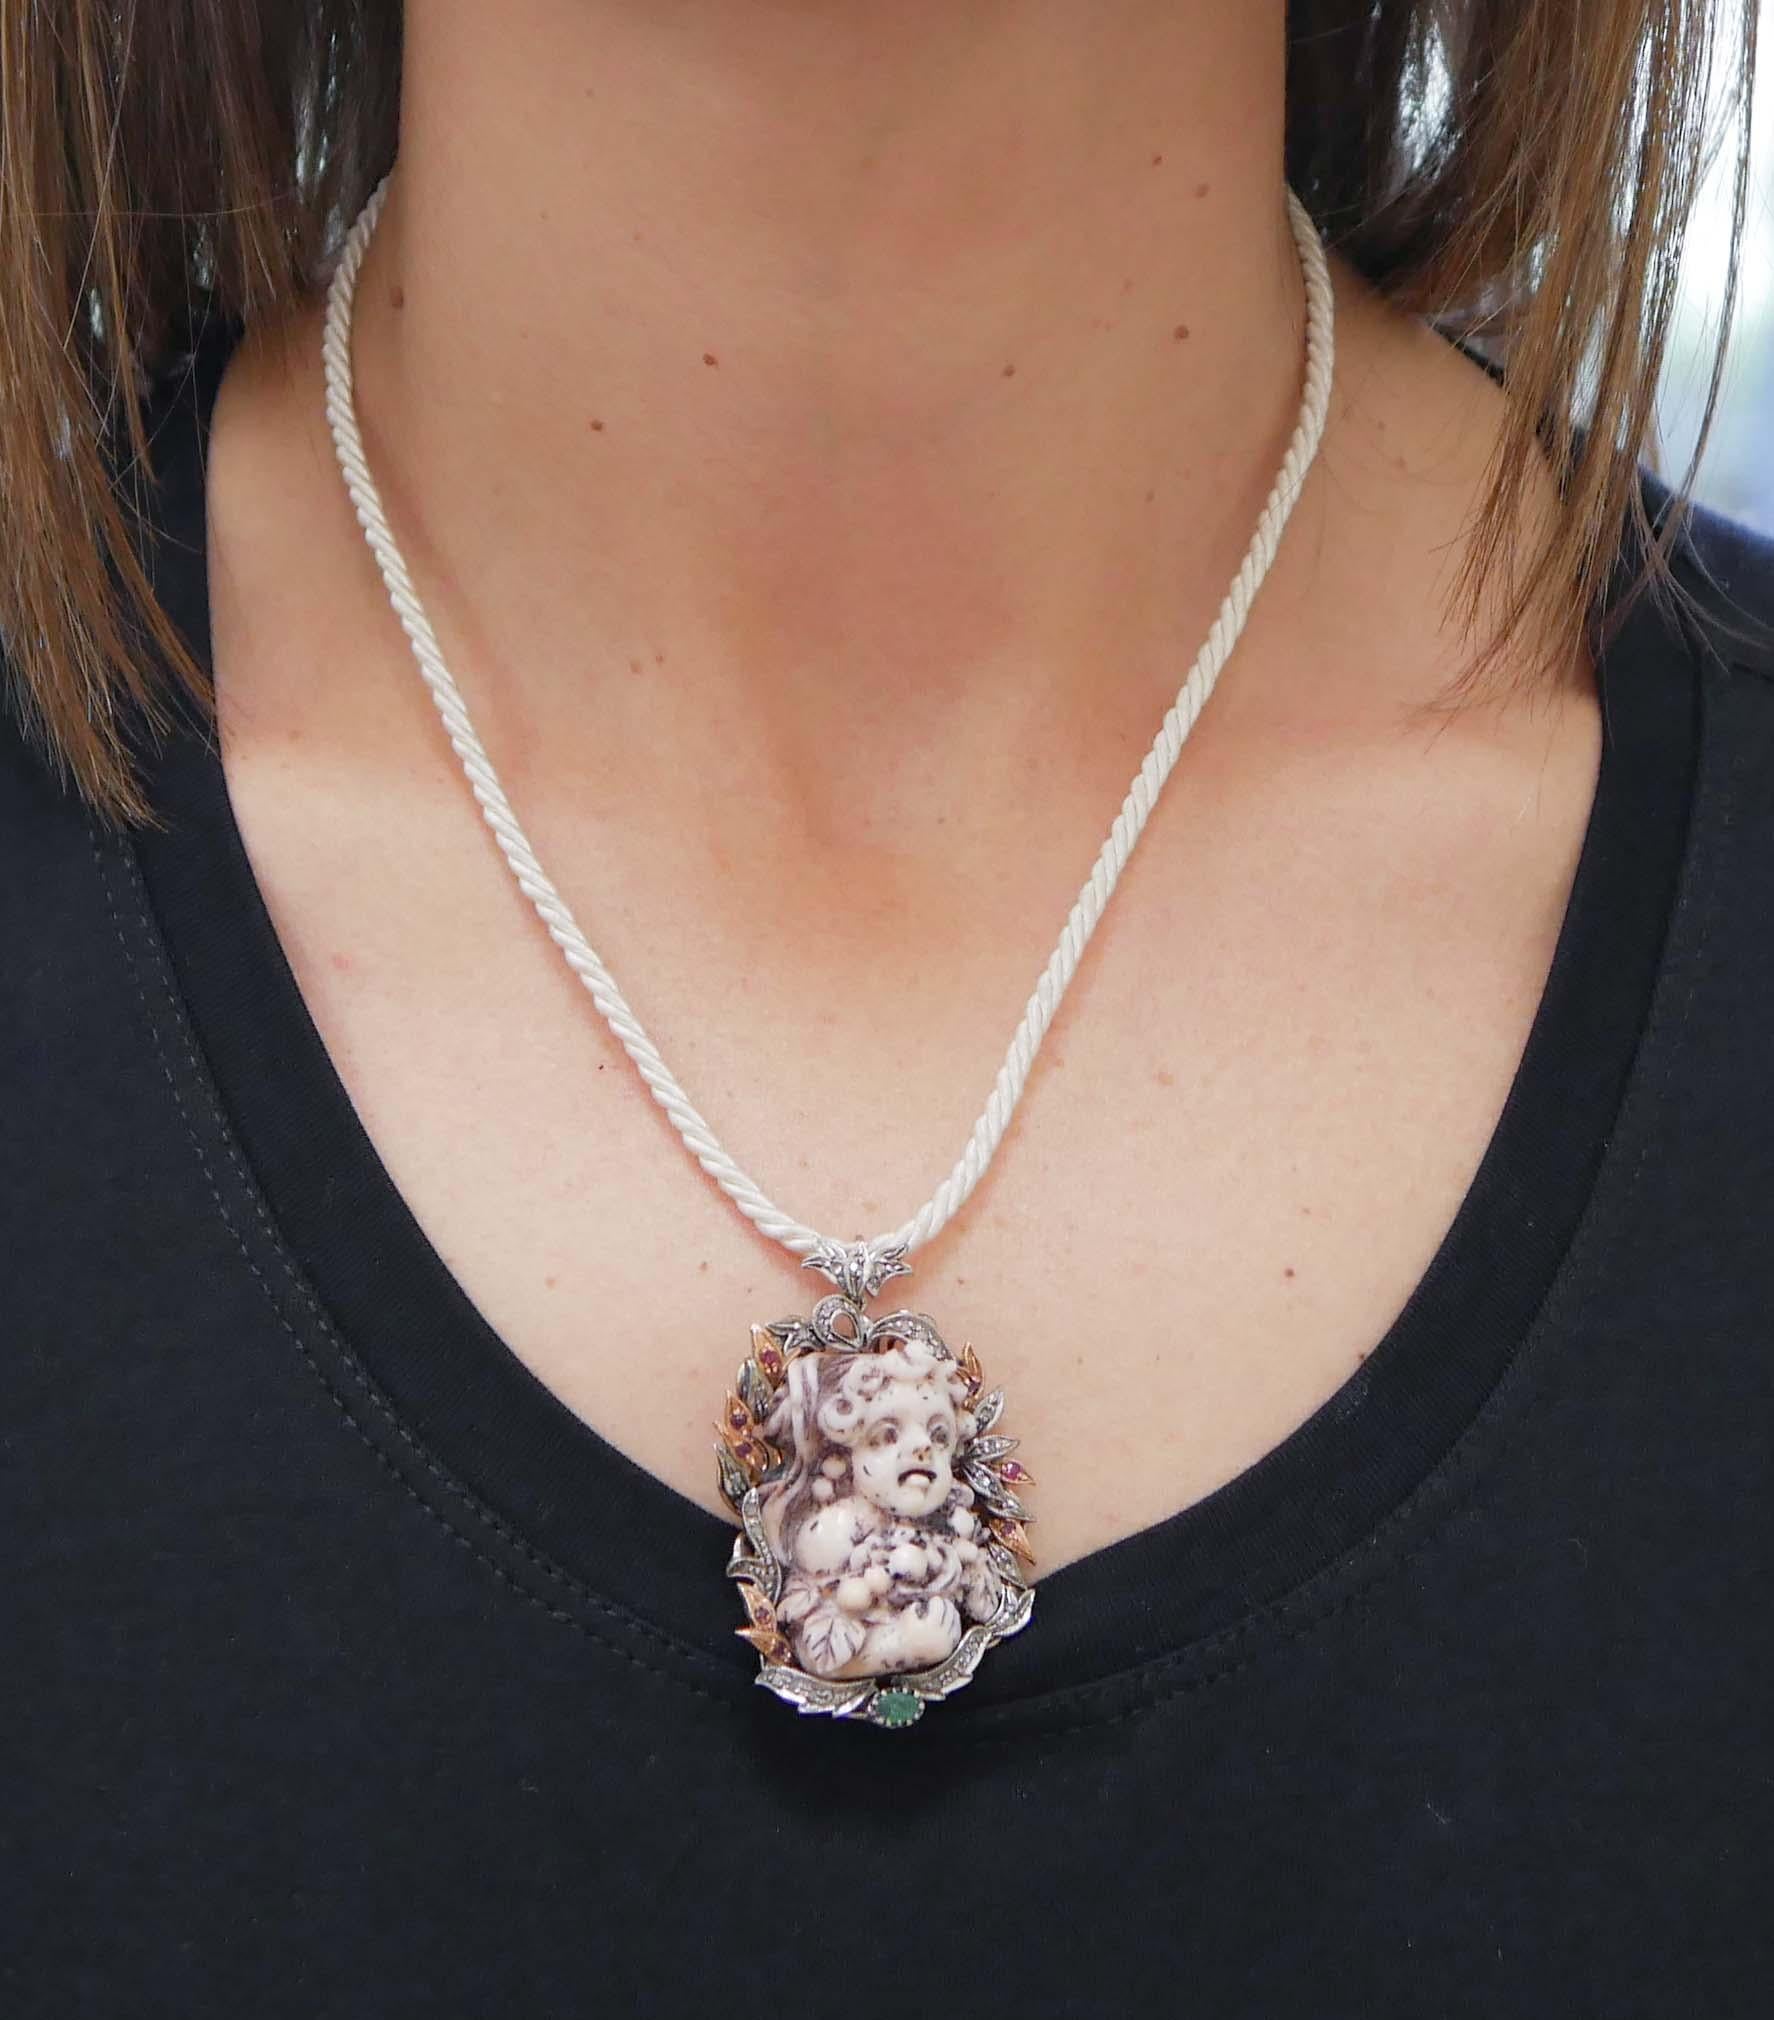 Women's Coral, Diamonds, Emeralds, Rubies, Rose Gold and Silver Brooch/Pendant Necklace. For Sale